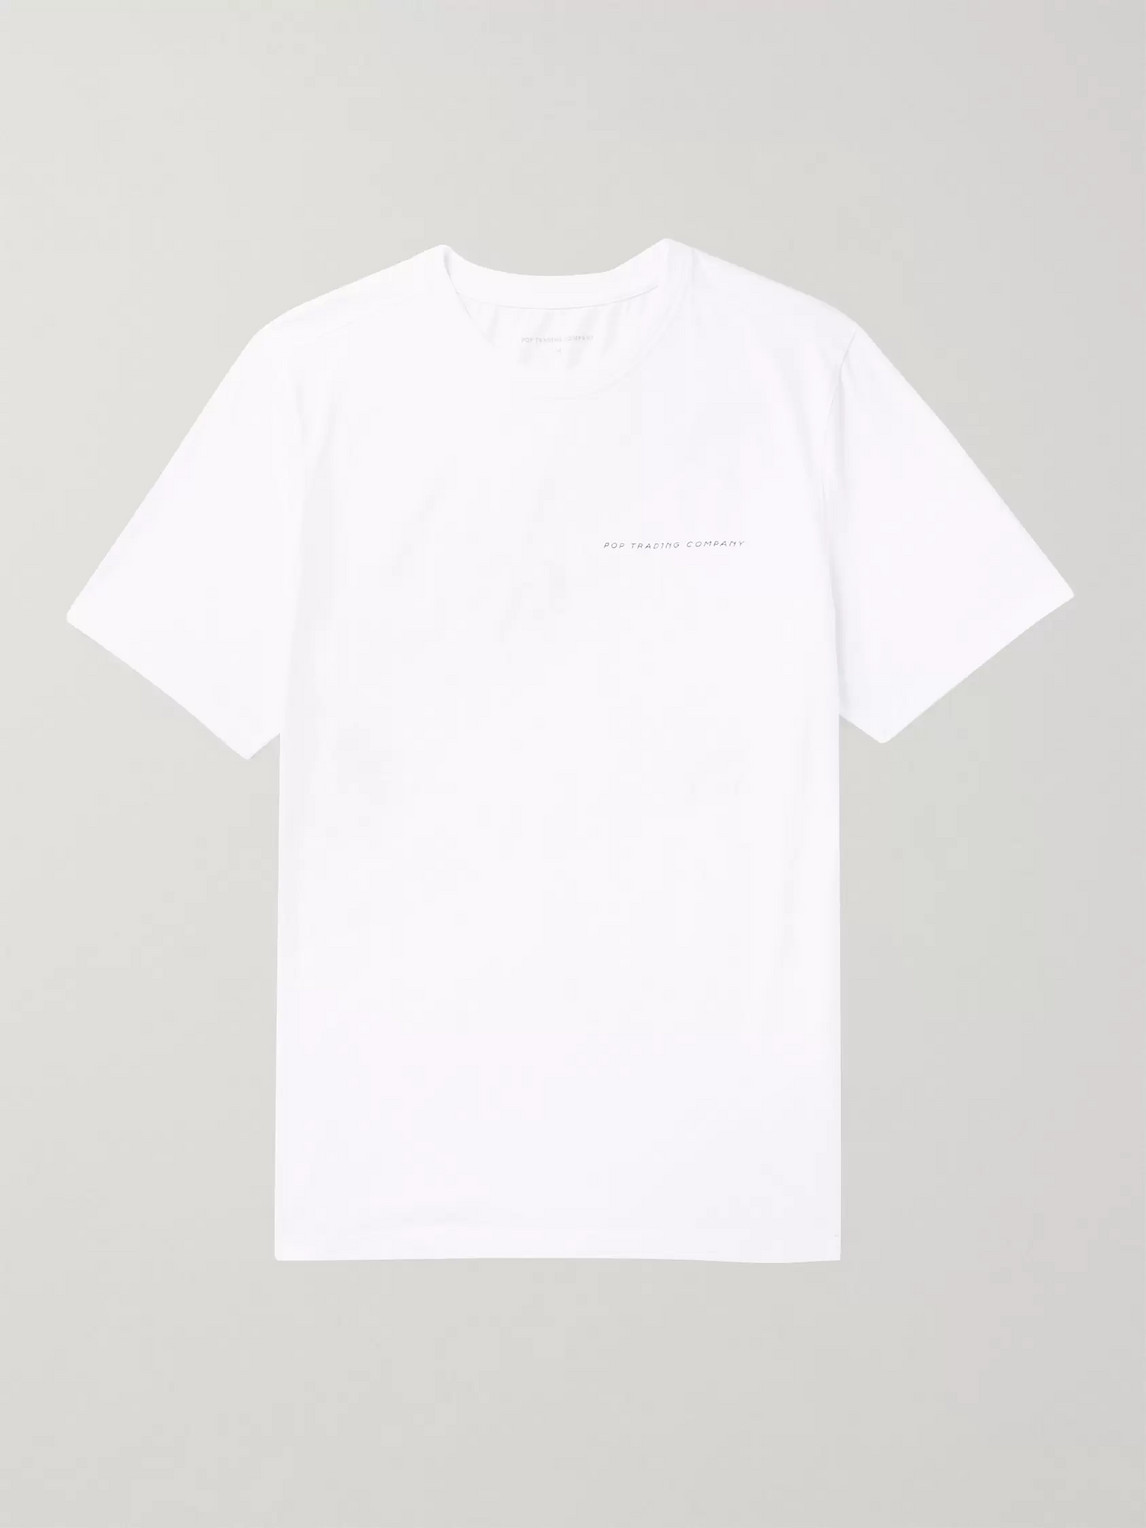 Pop Trading Company Joost Swarte Printed Cotton-jersey T-shirt In White